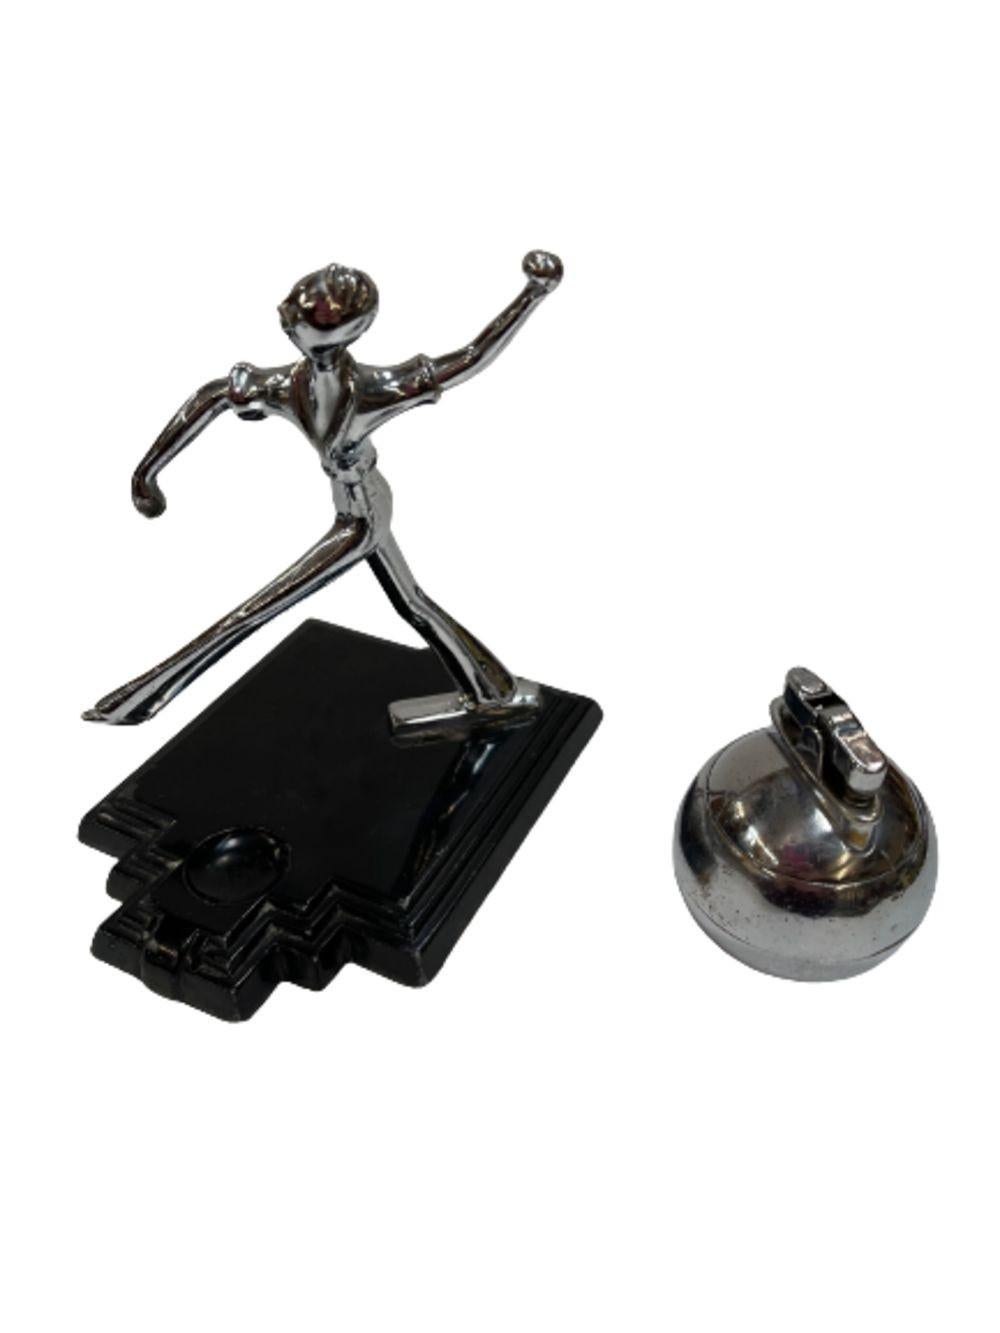 Art Deco Ball Player Table Table Lighter with Base by Ronson For Sale 2